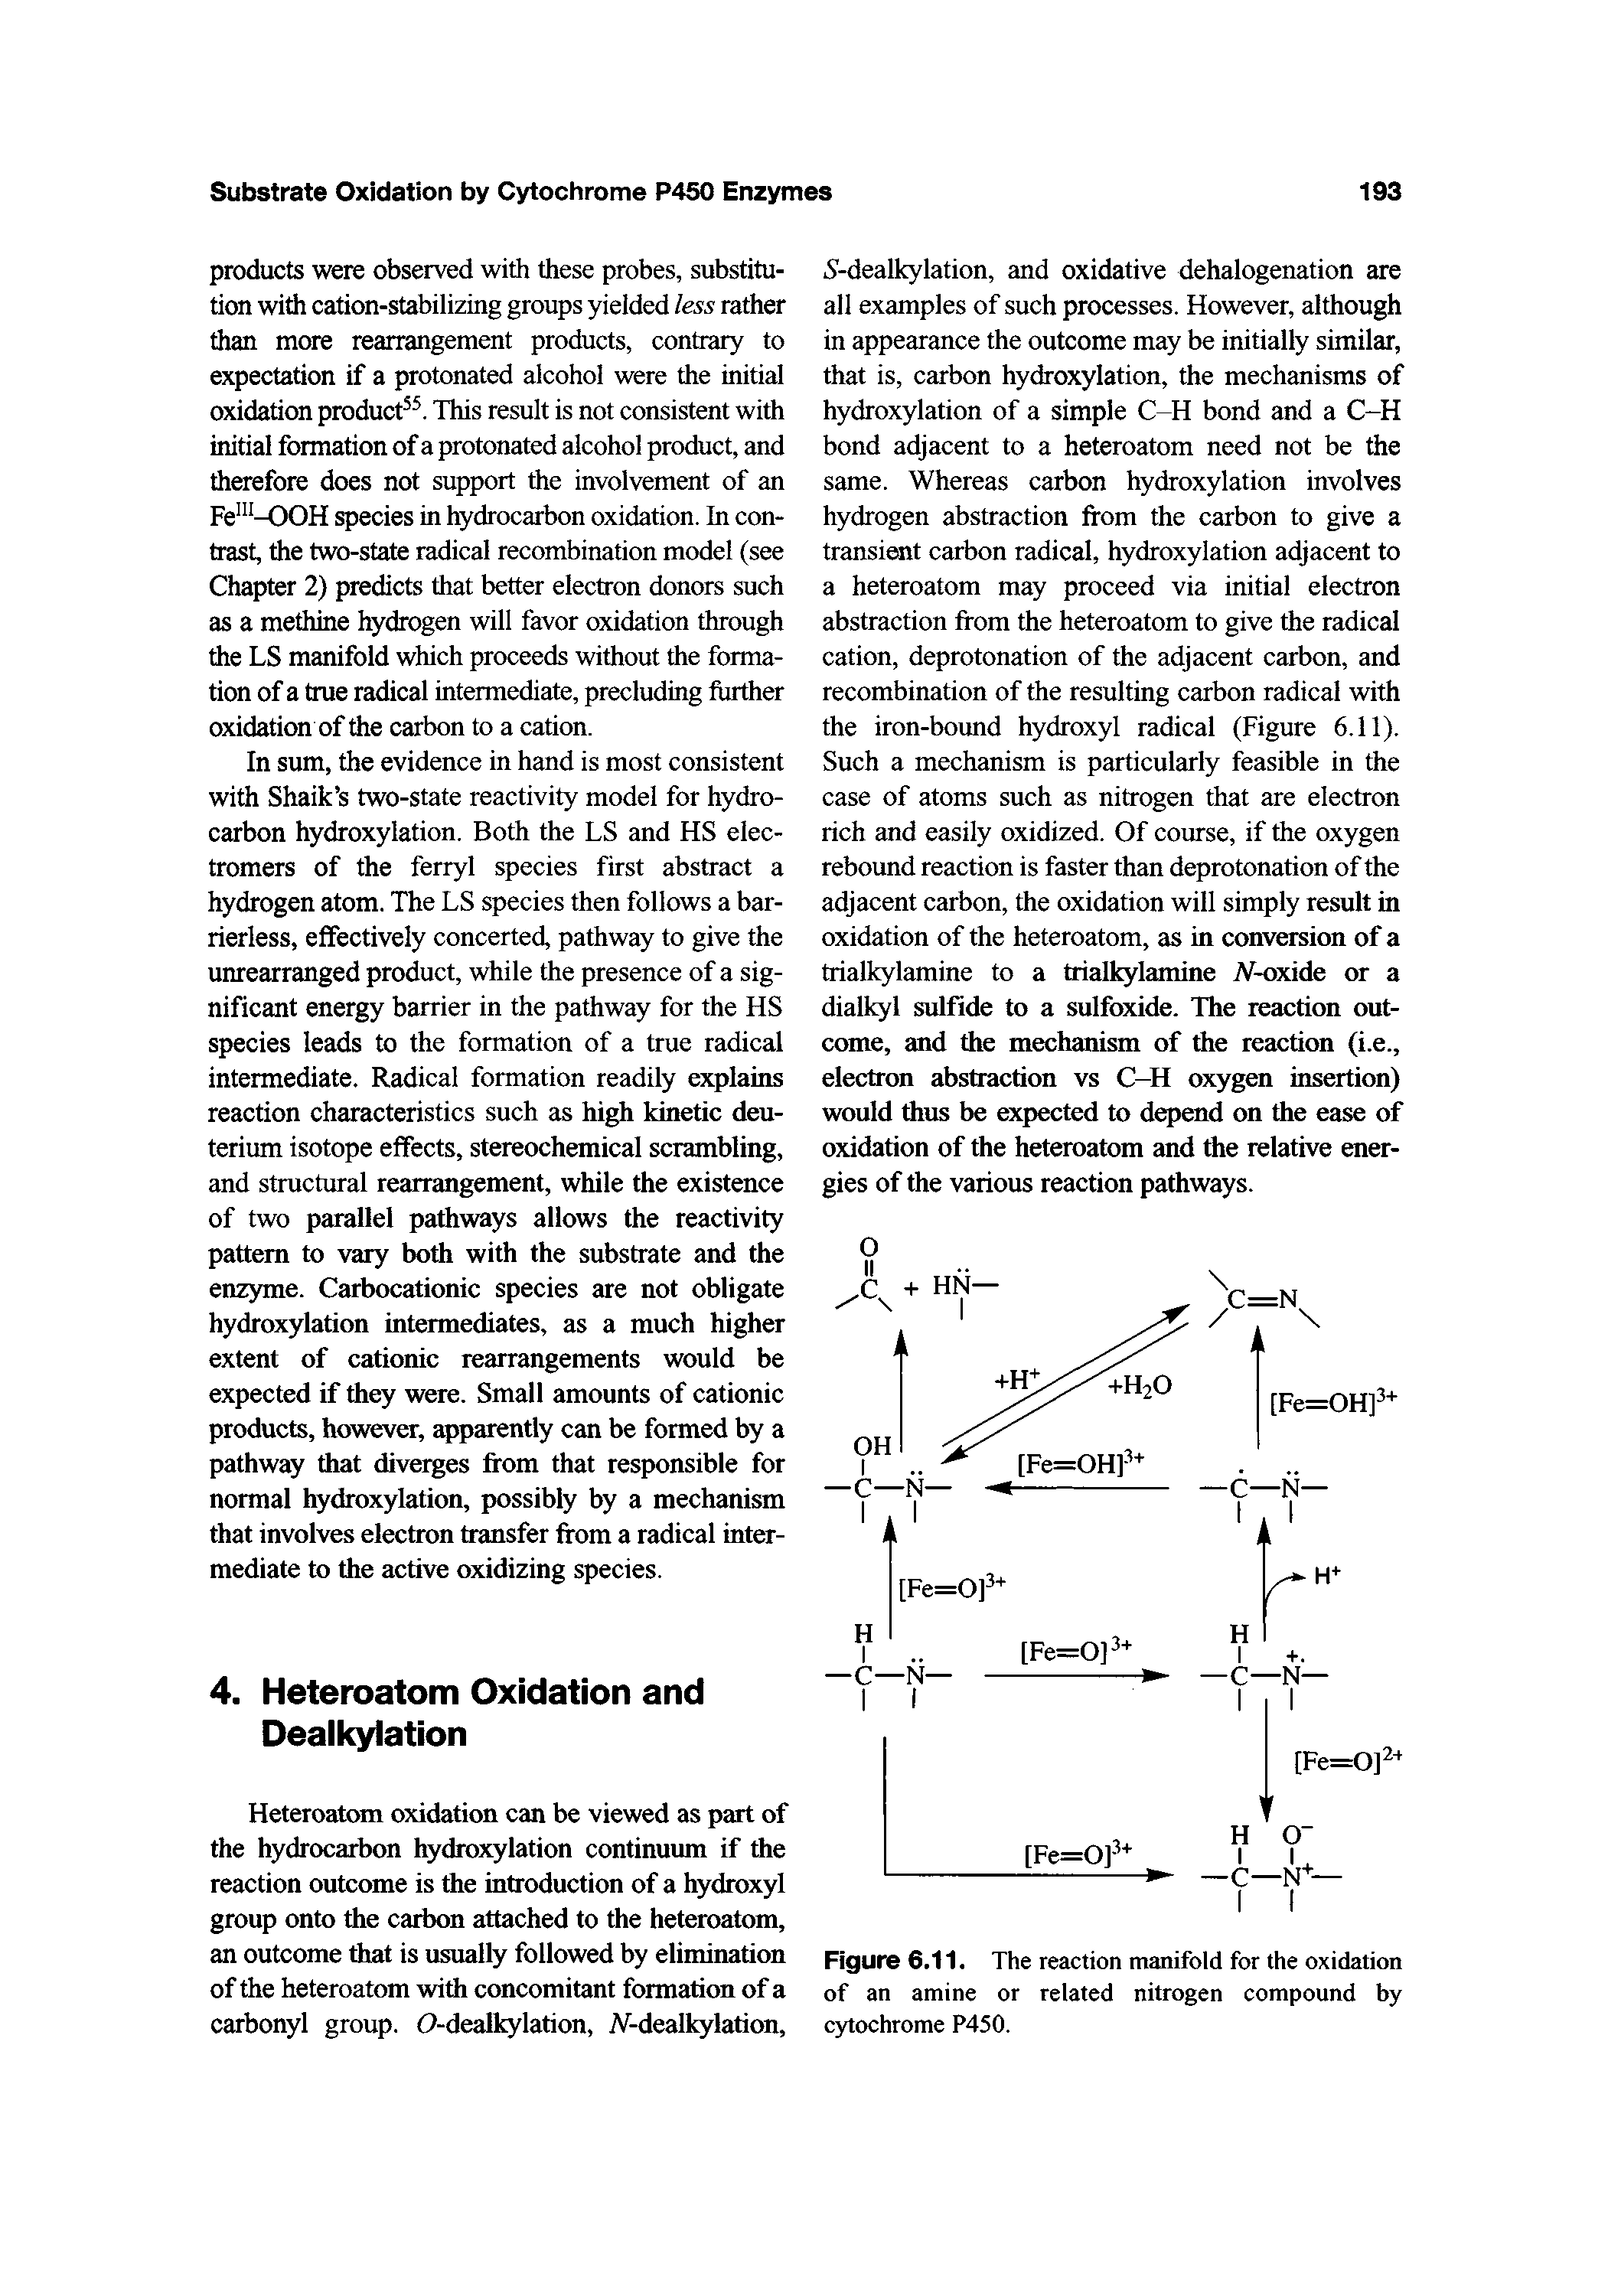 Figure 6.11. The reaction manifold for the oxidation of an amine or related nitrogen compound by cytochrome P450.